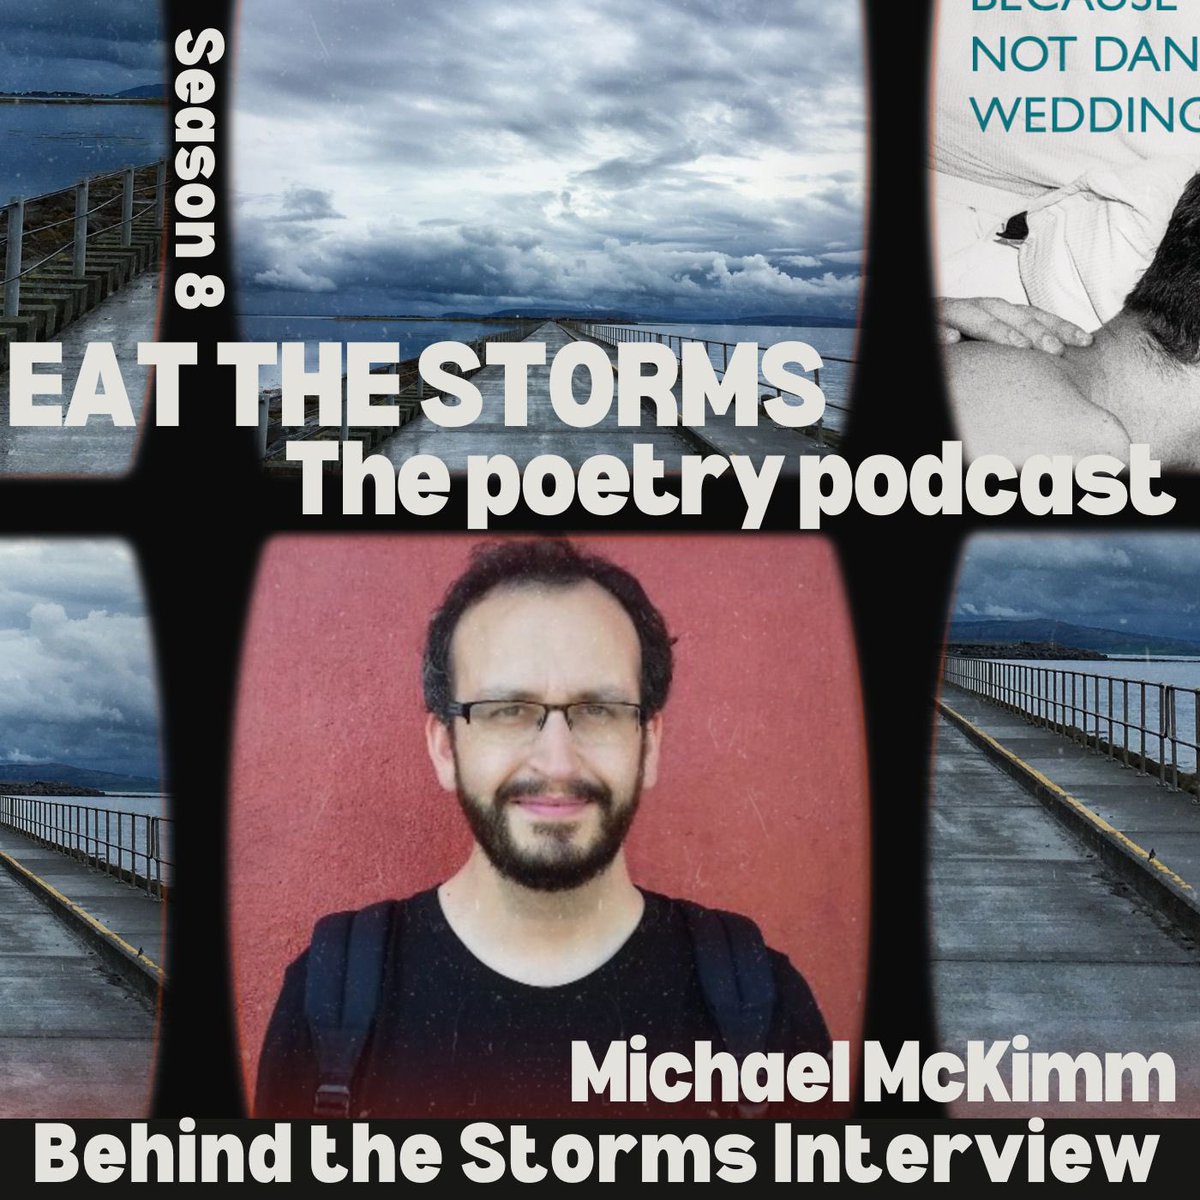 Tomorrow from 5pm on your preferred podcast platform @MichaelMcKimm drops by the #poetry #podcast Eat the Storms to read from his poetry collection Because We Could Not Dance At The Wedding and to chat to me Behind the Storms. Join us to Stay Bloody Poetic 😉